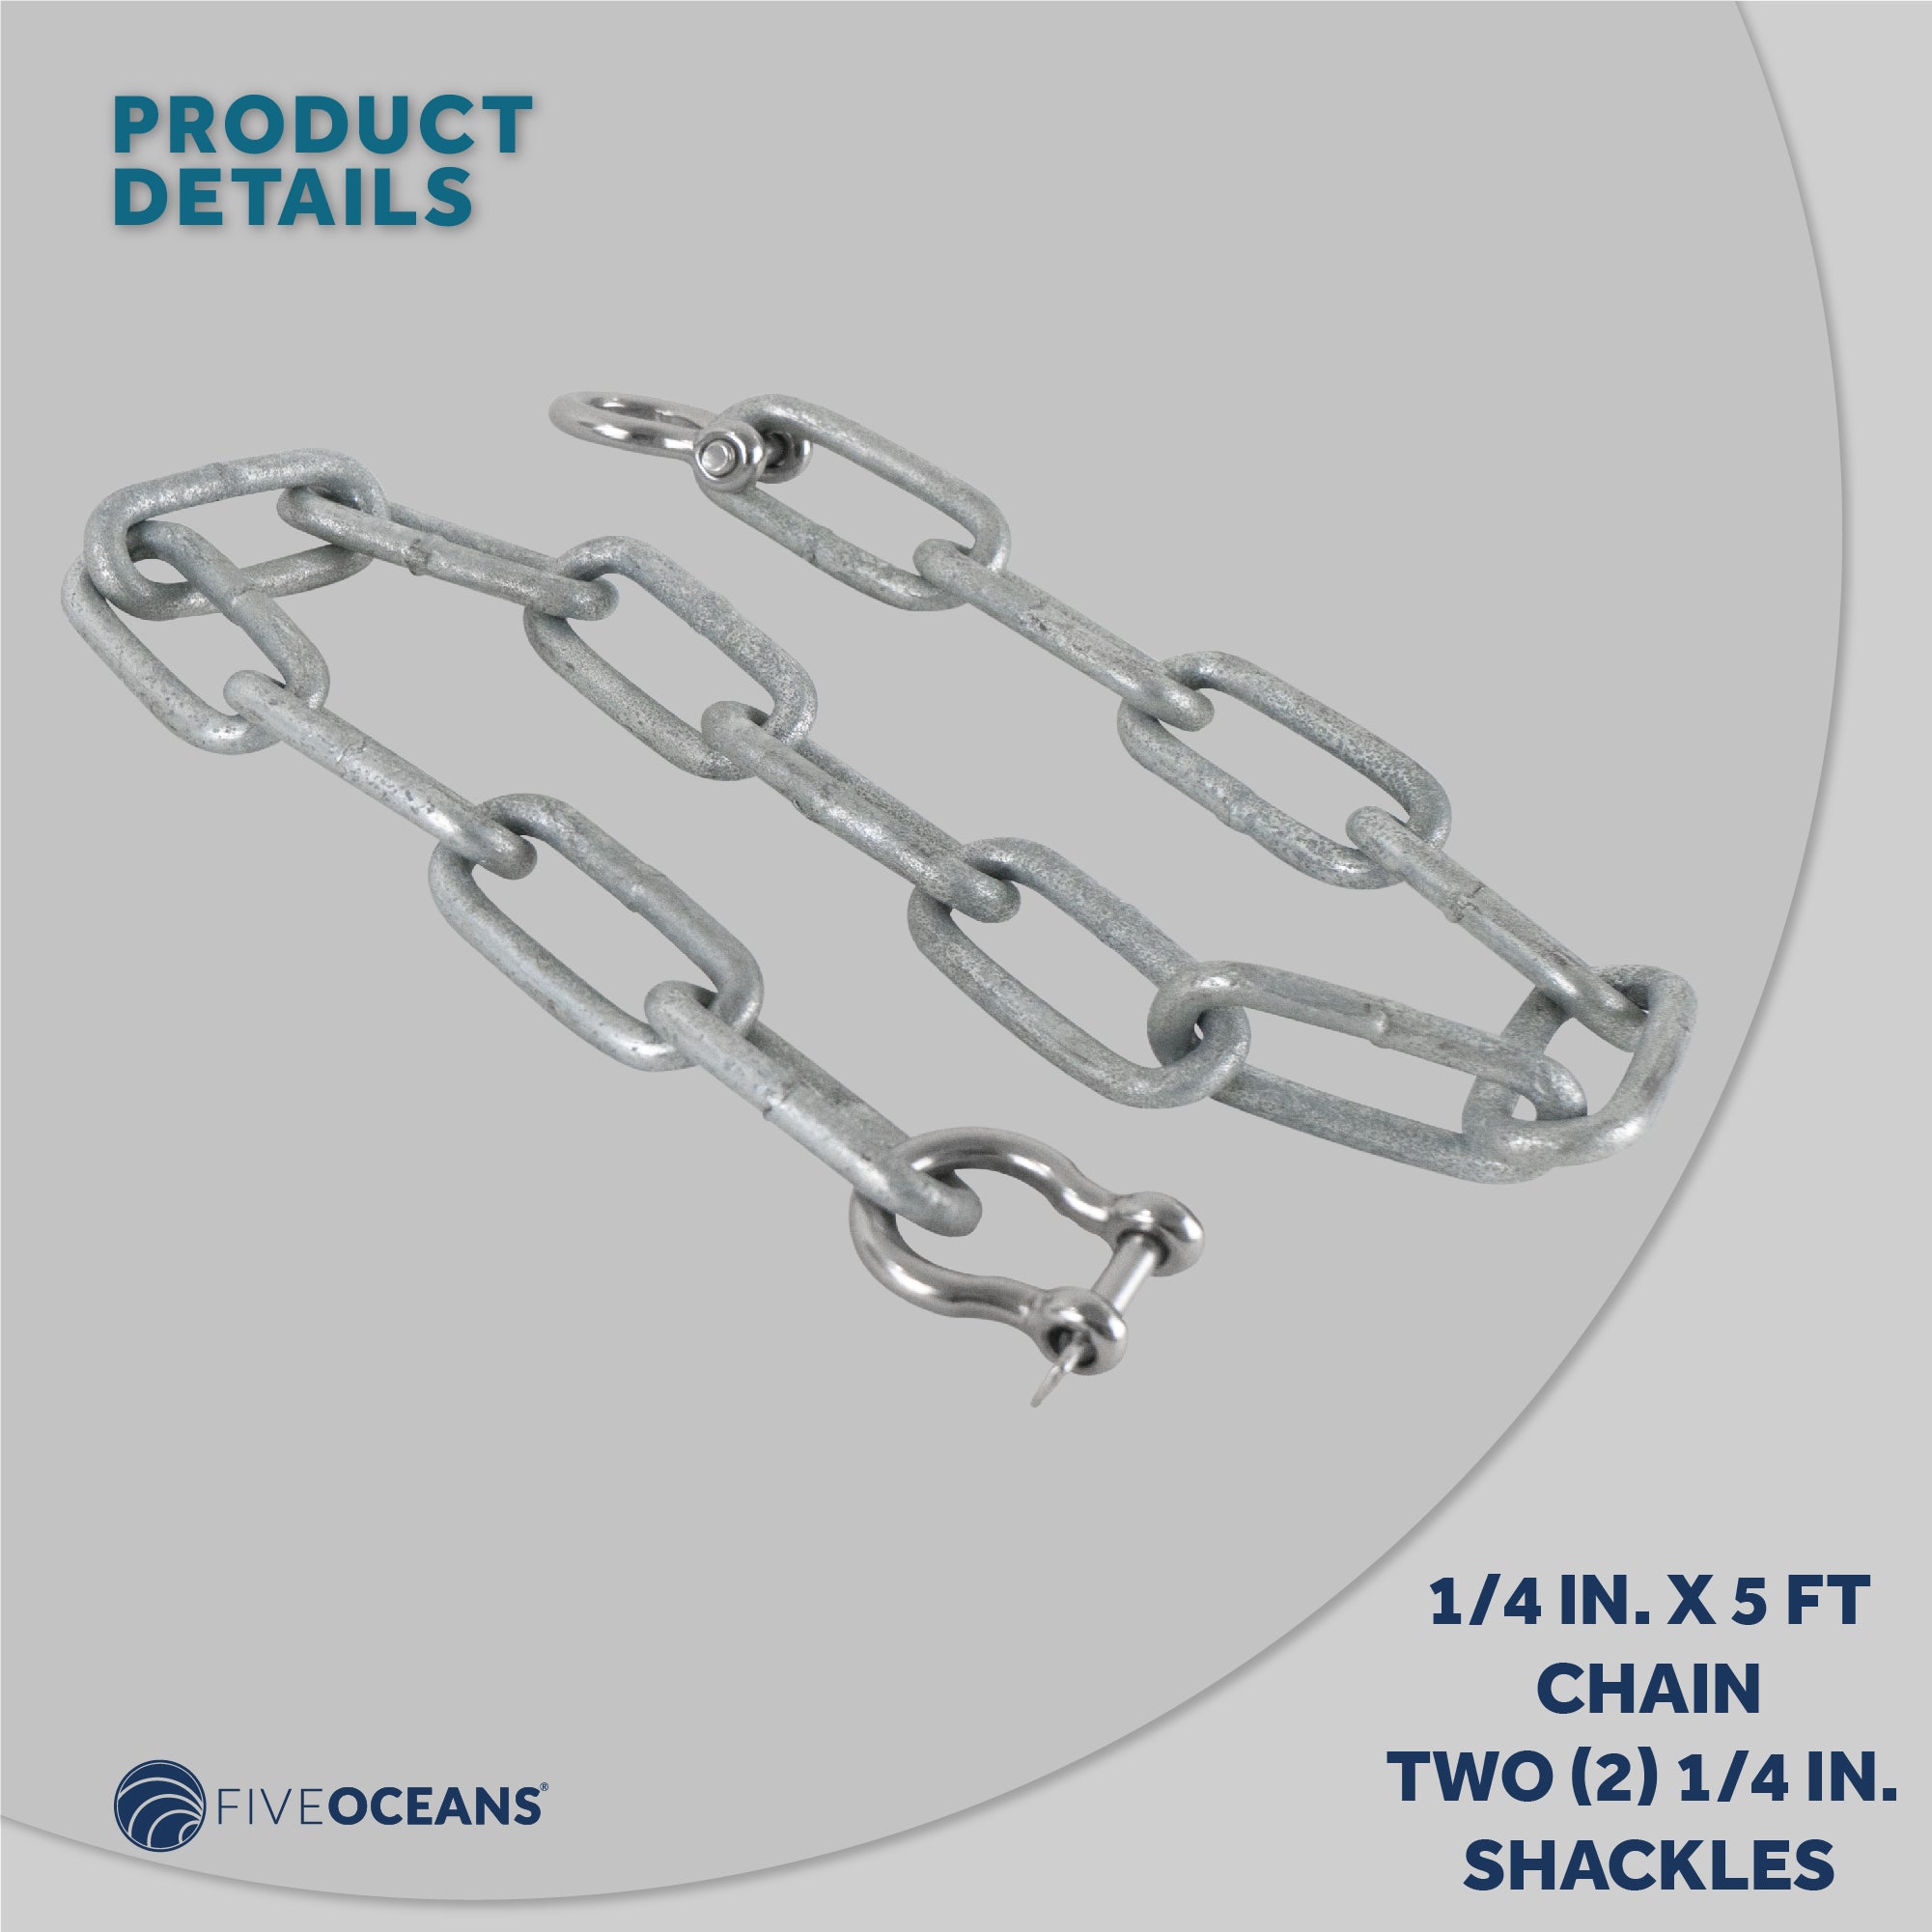 Marine Boat Anchor Lead Chain 1/4 inches x 5 Feet Hot-Dipped Galvanized Steel with 2 AISI316 Stainless Steel 1/4 inches Bow Shackles FO4568-GN5